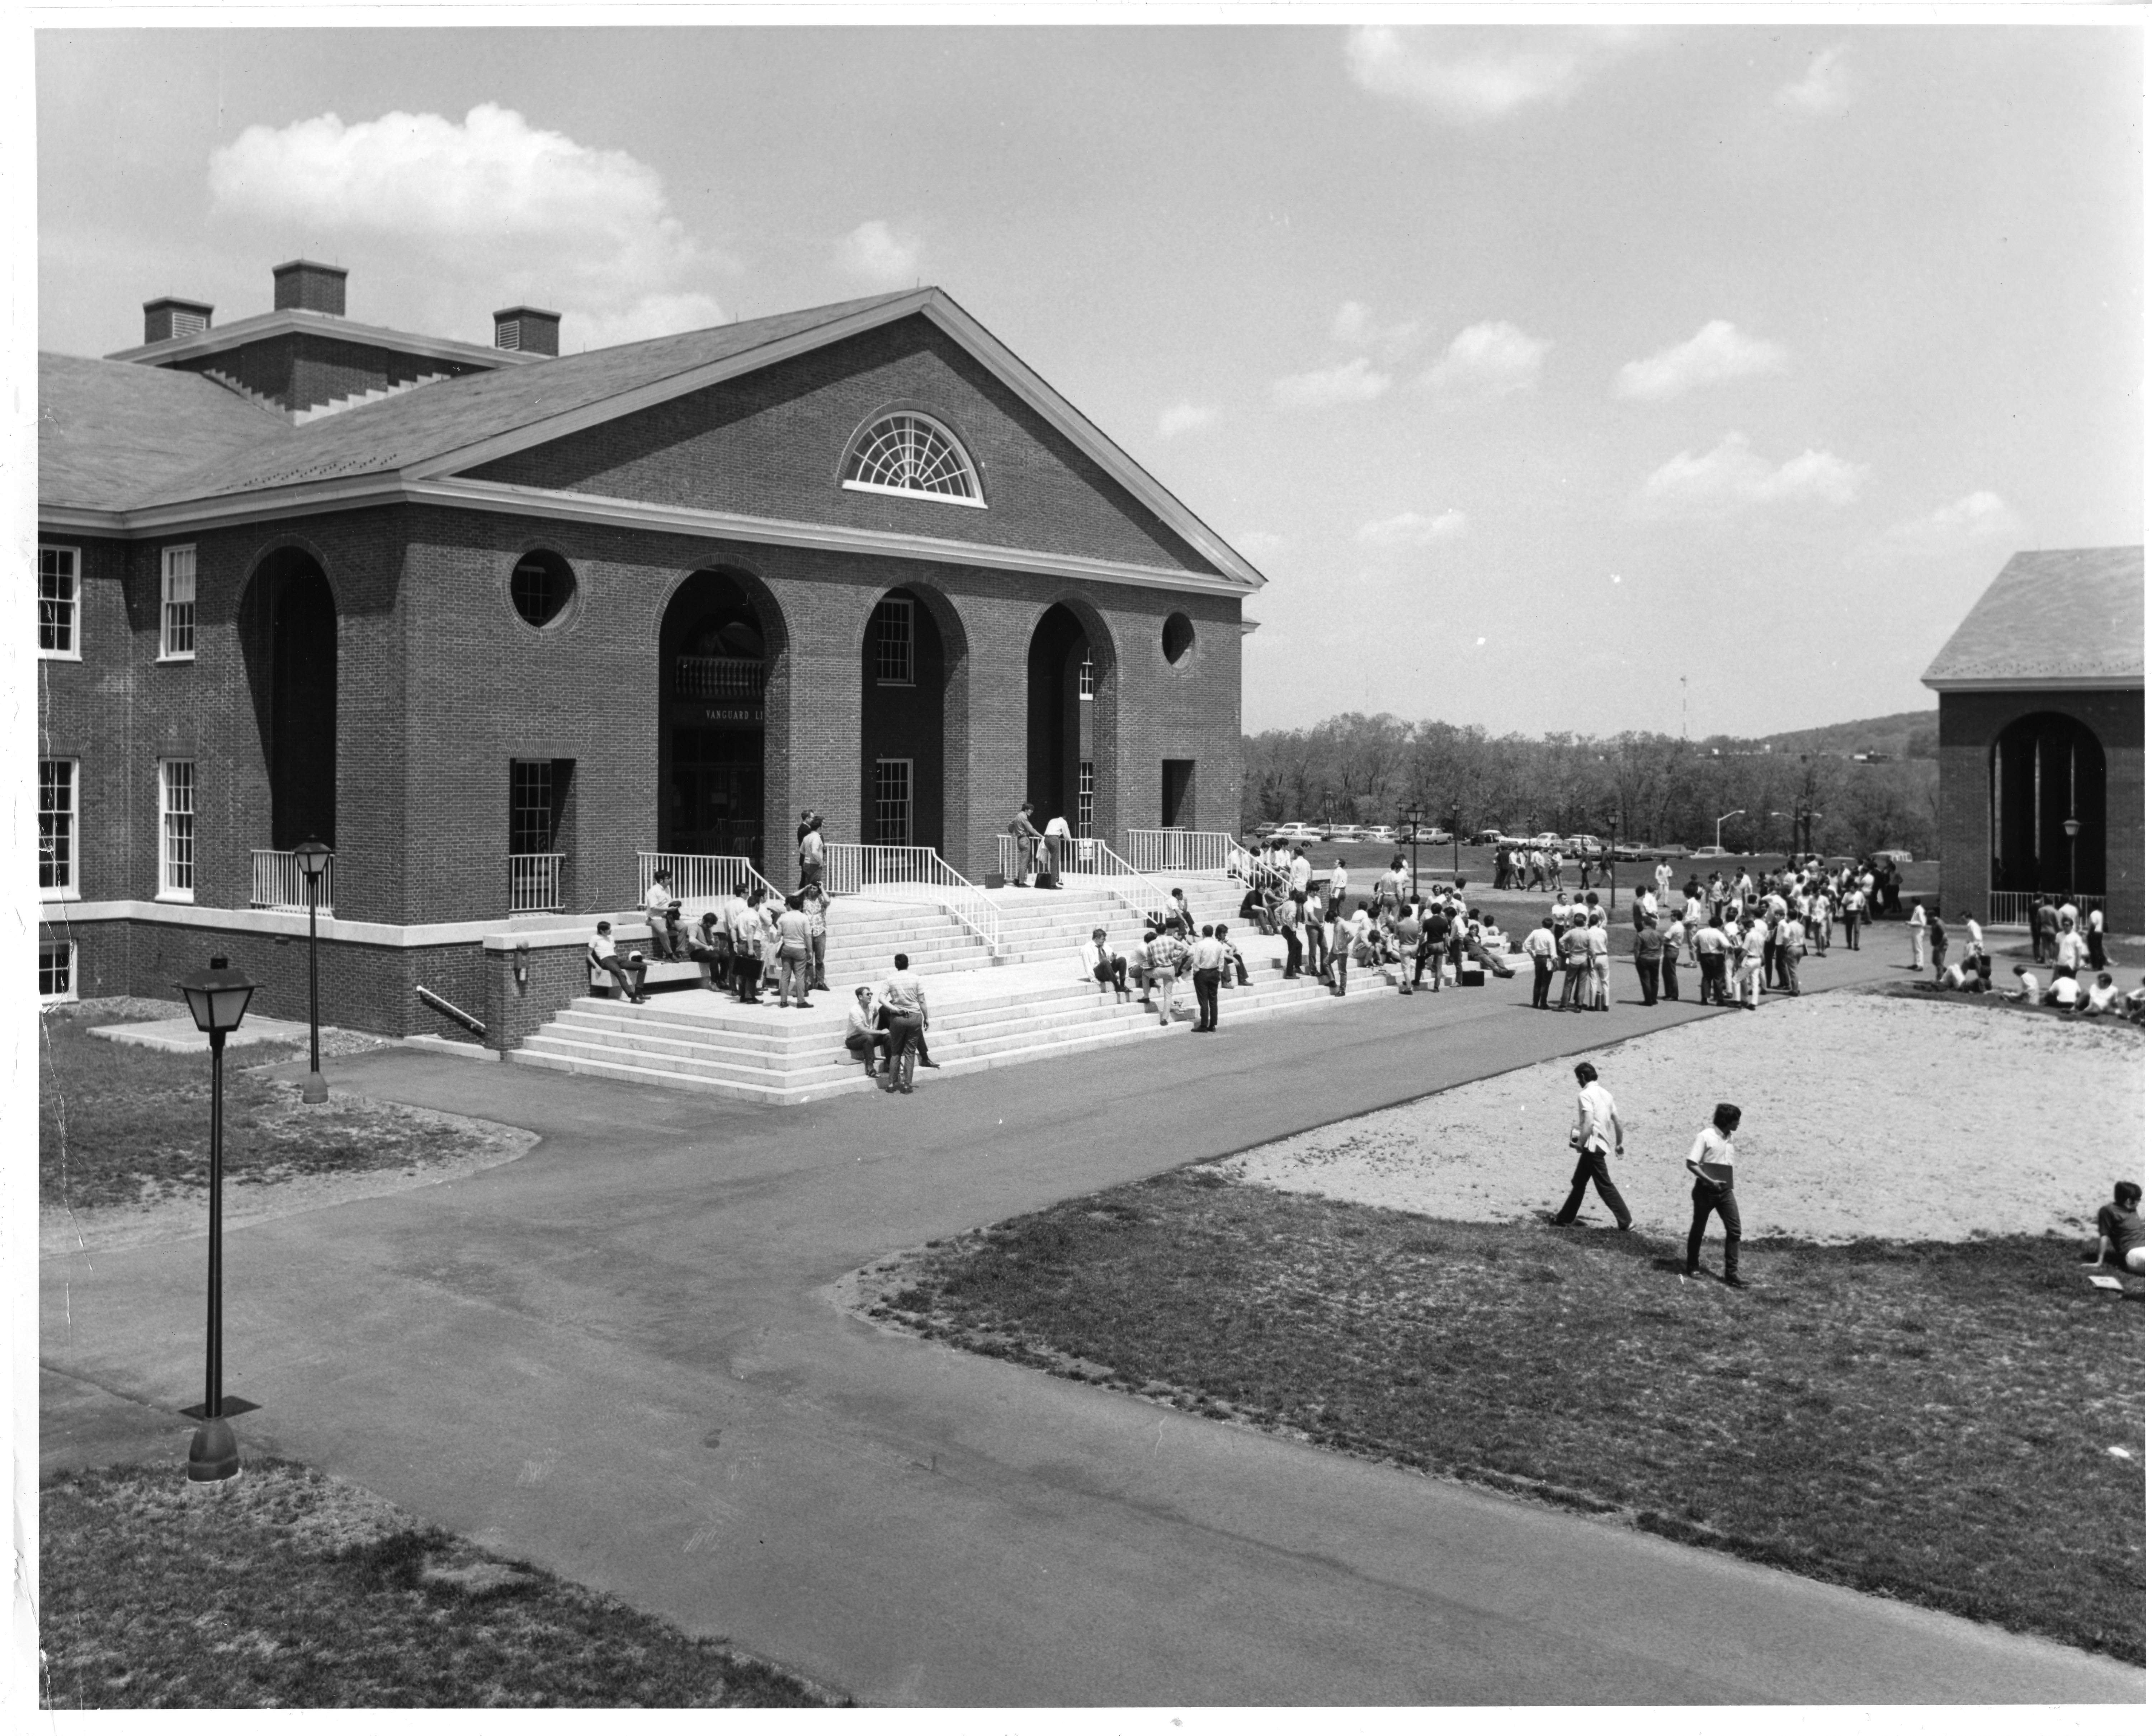 This photo of the Bentley Library shows its original front facade, which consisted of large brick archways. These arches were the inspiration for the shape and style of "Portal."